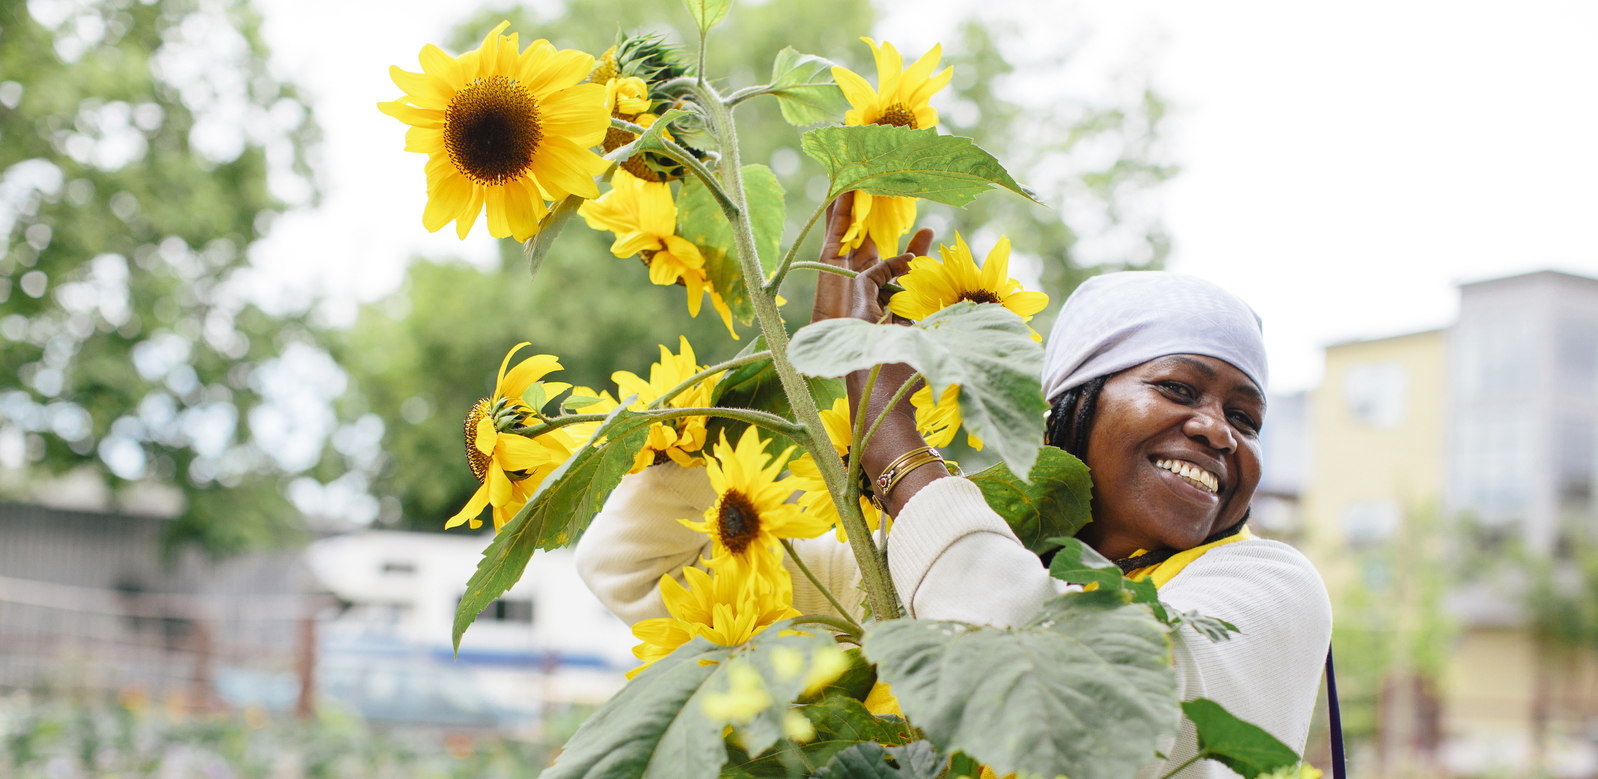 Smiling woman holding sunflowers